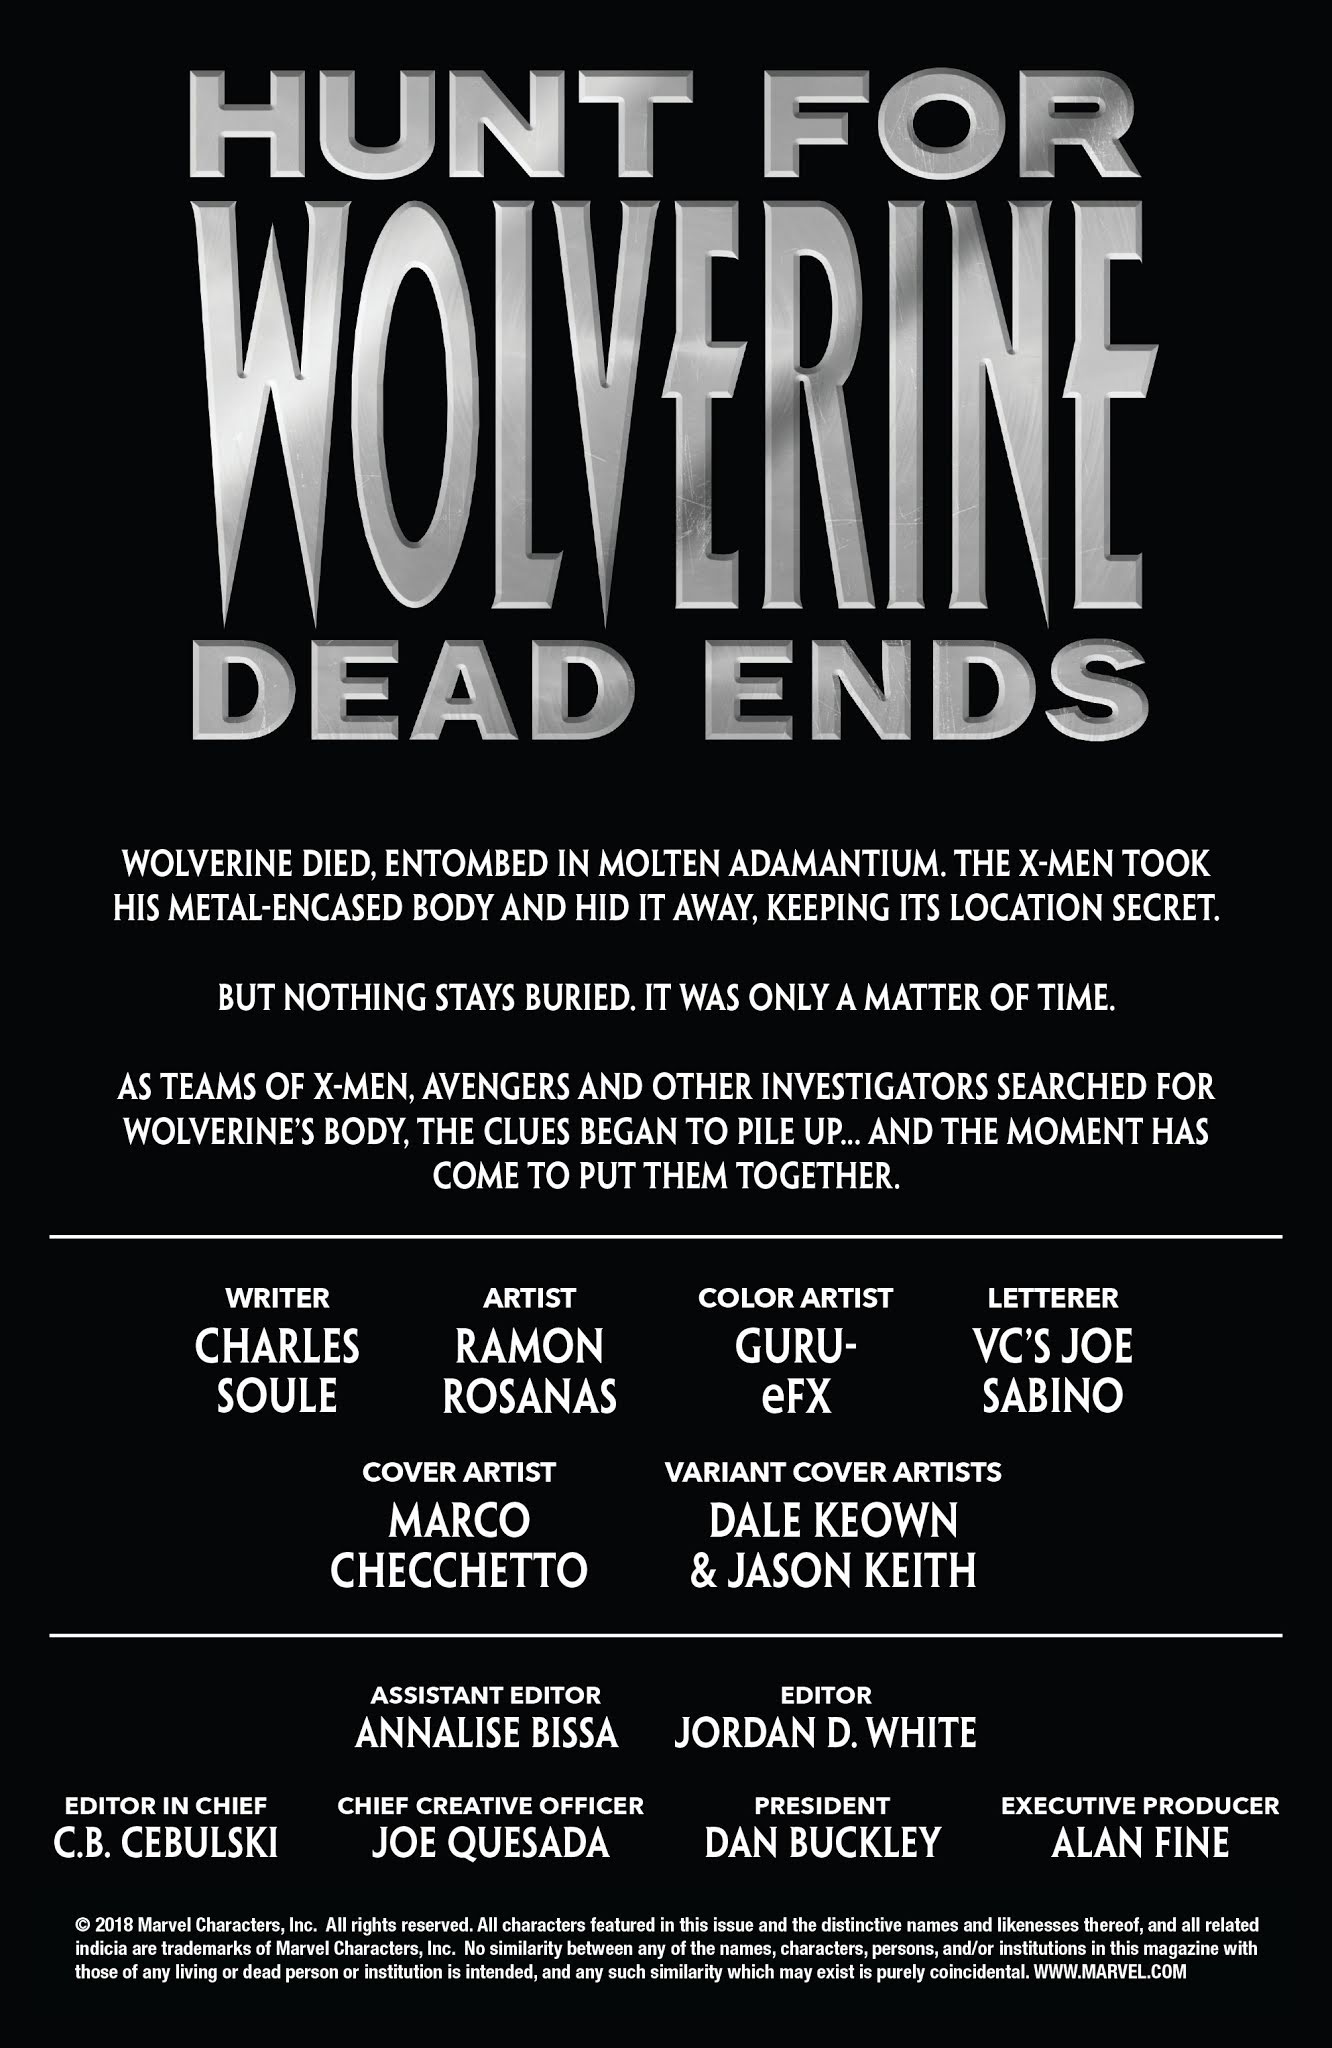 Read online Hunt for Wolverine: Dead Ends comic -  Issue # Full - 4